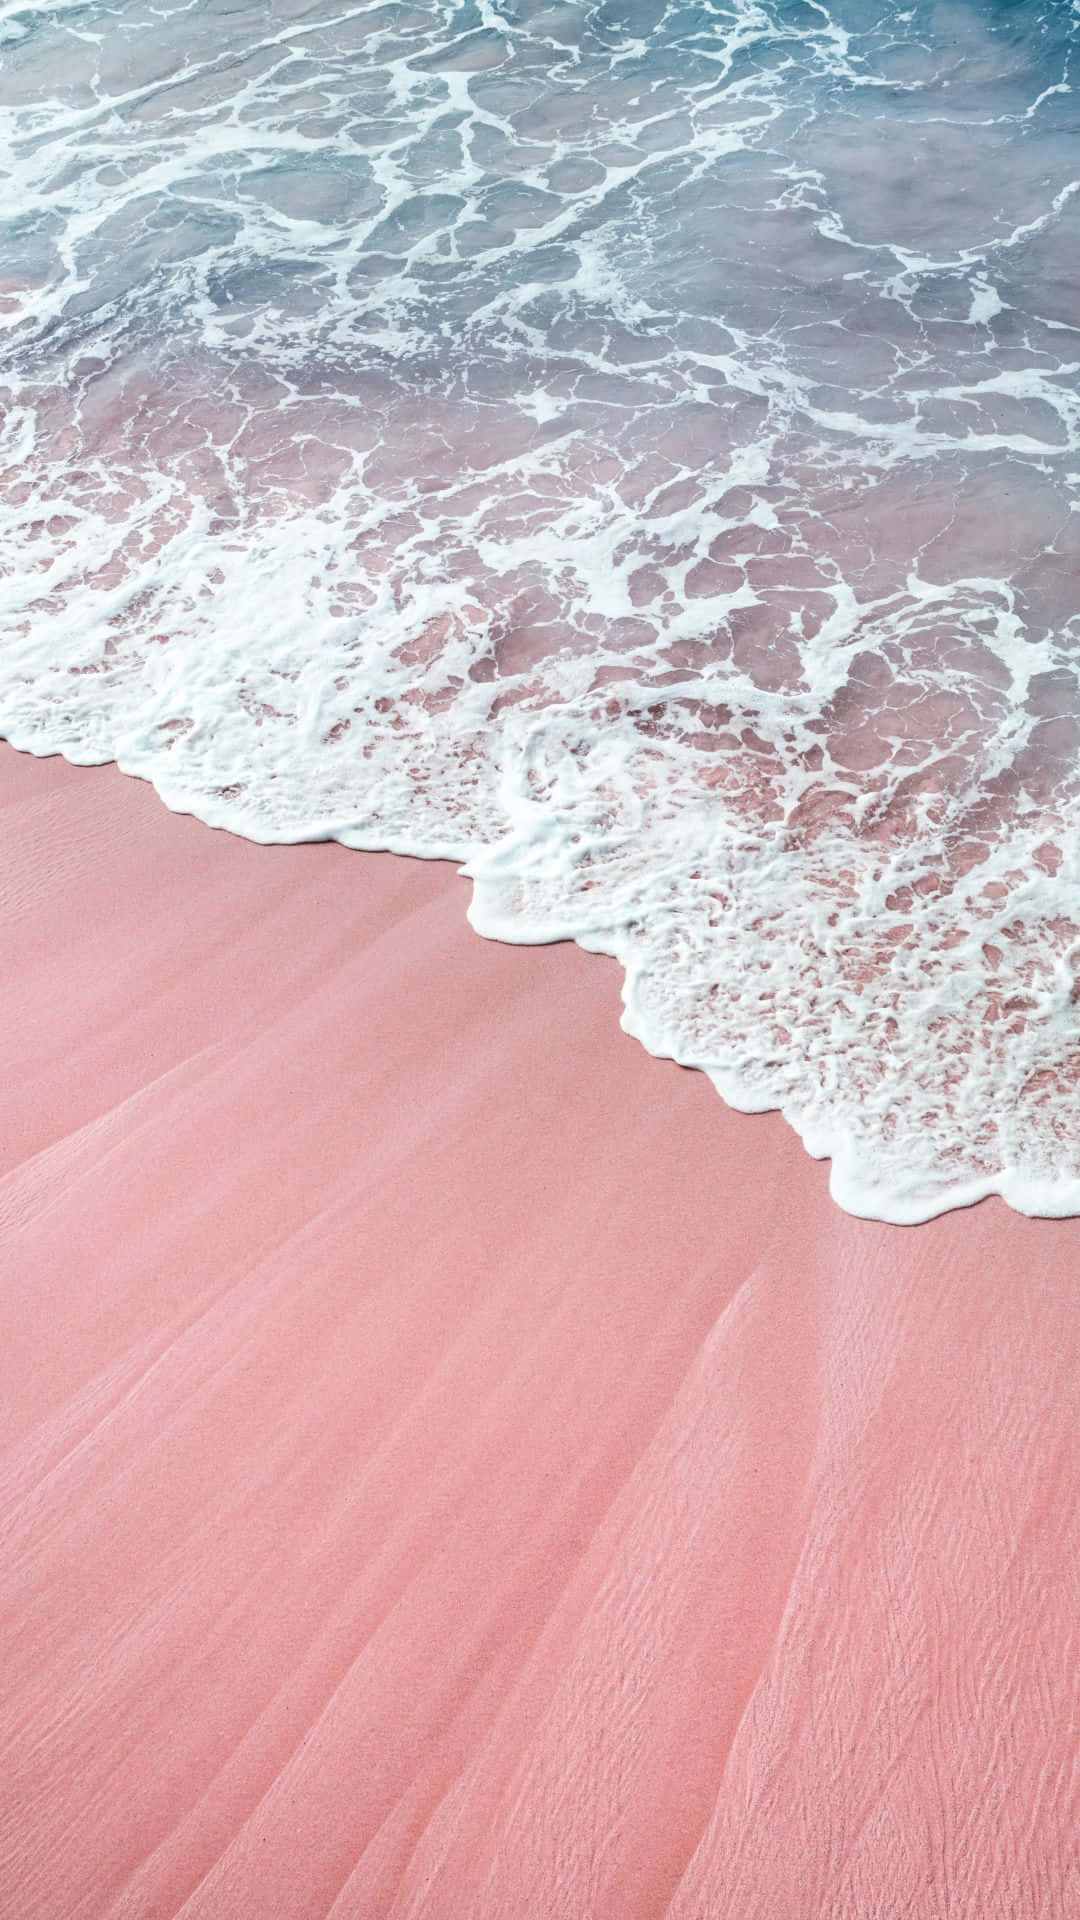 Pink Sand Beach With Waves And Ocean